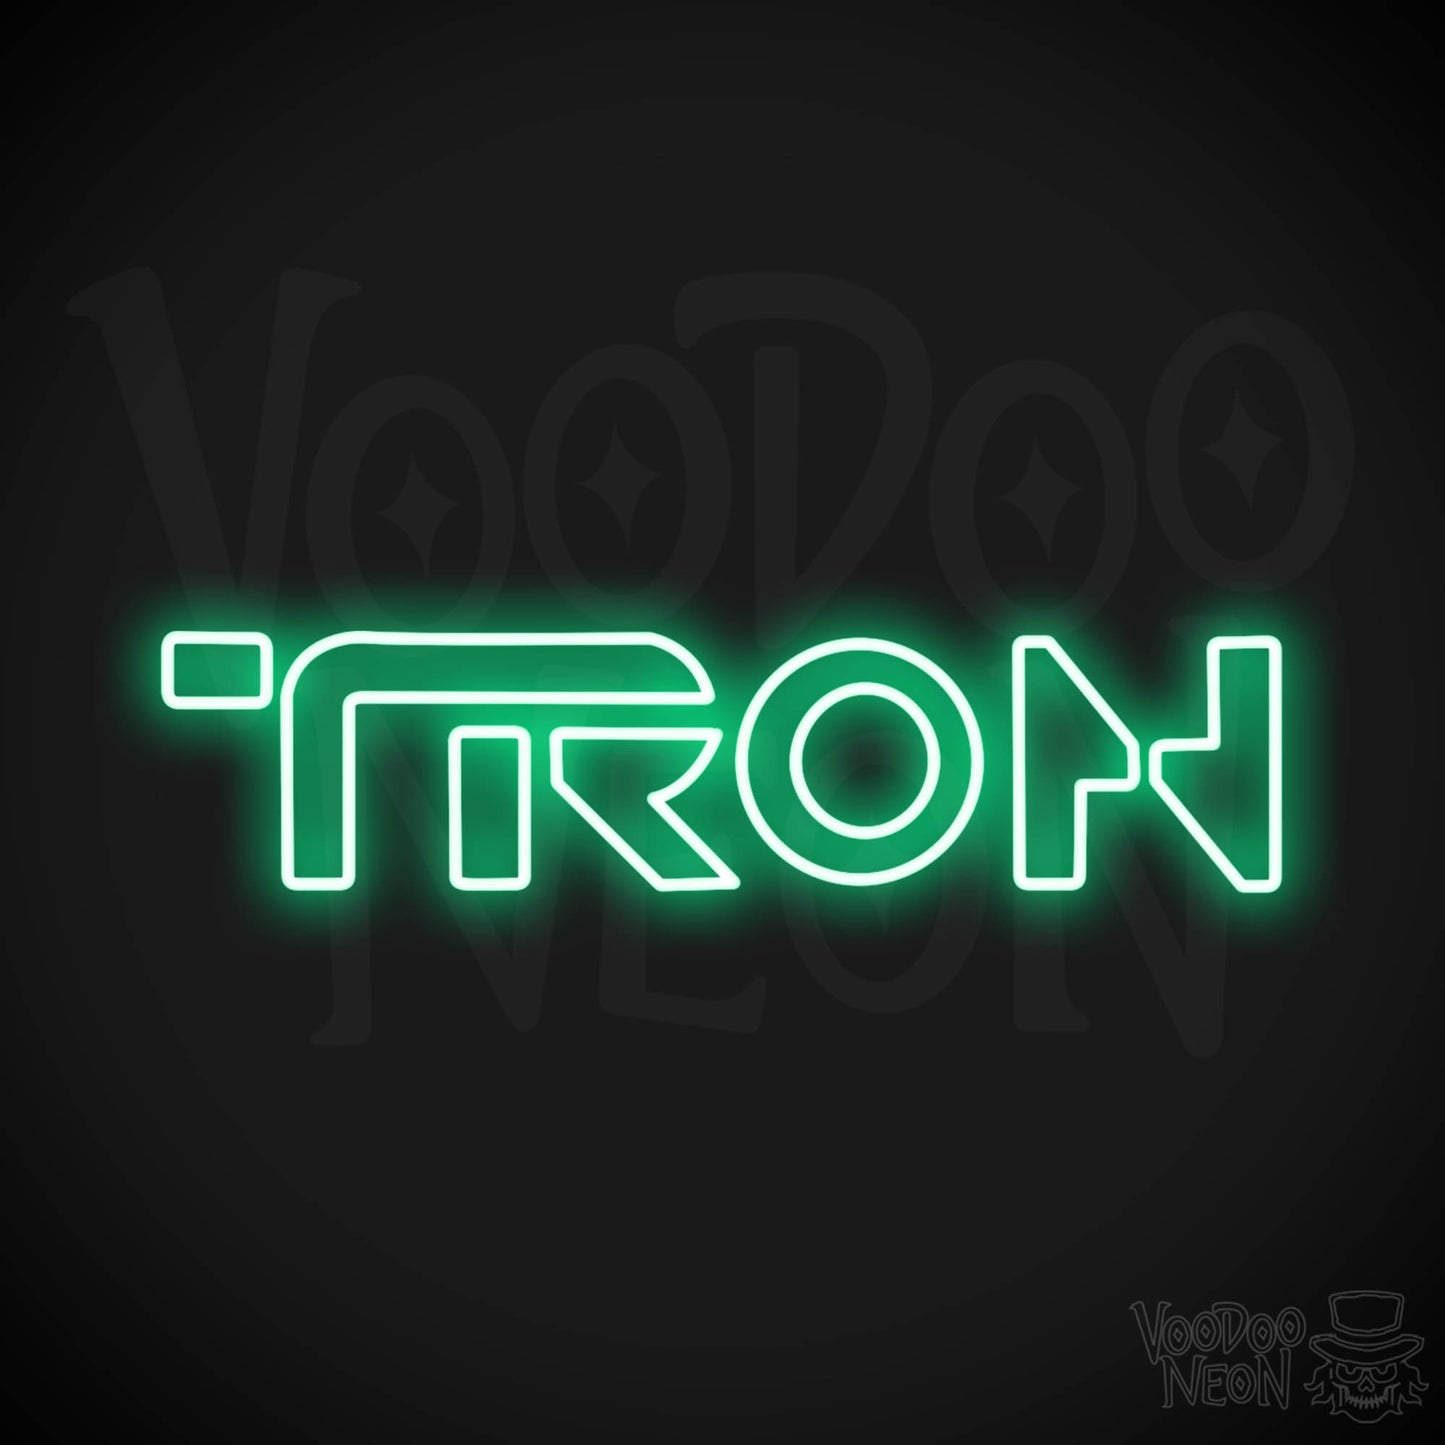 Tron Neon Sign - Neon Tron Sign - Movie LED Wall Art - Color Green